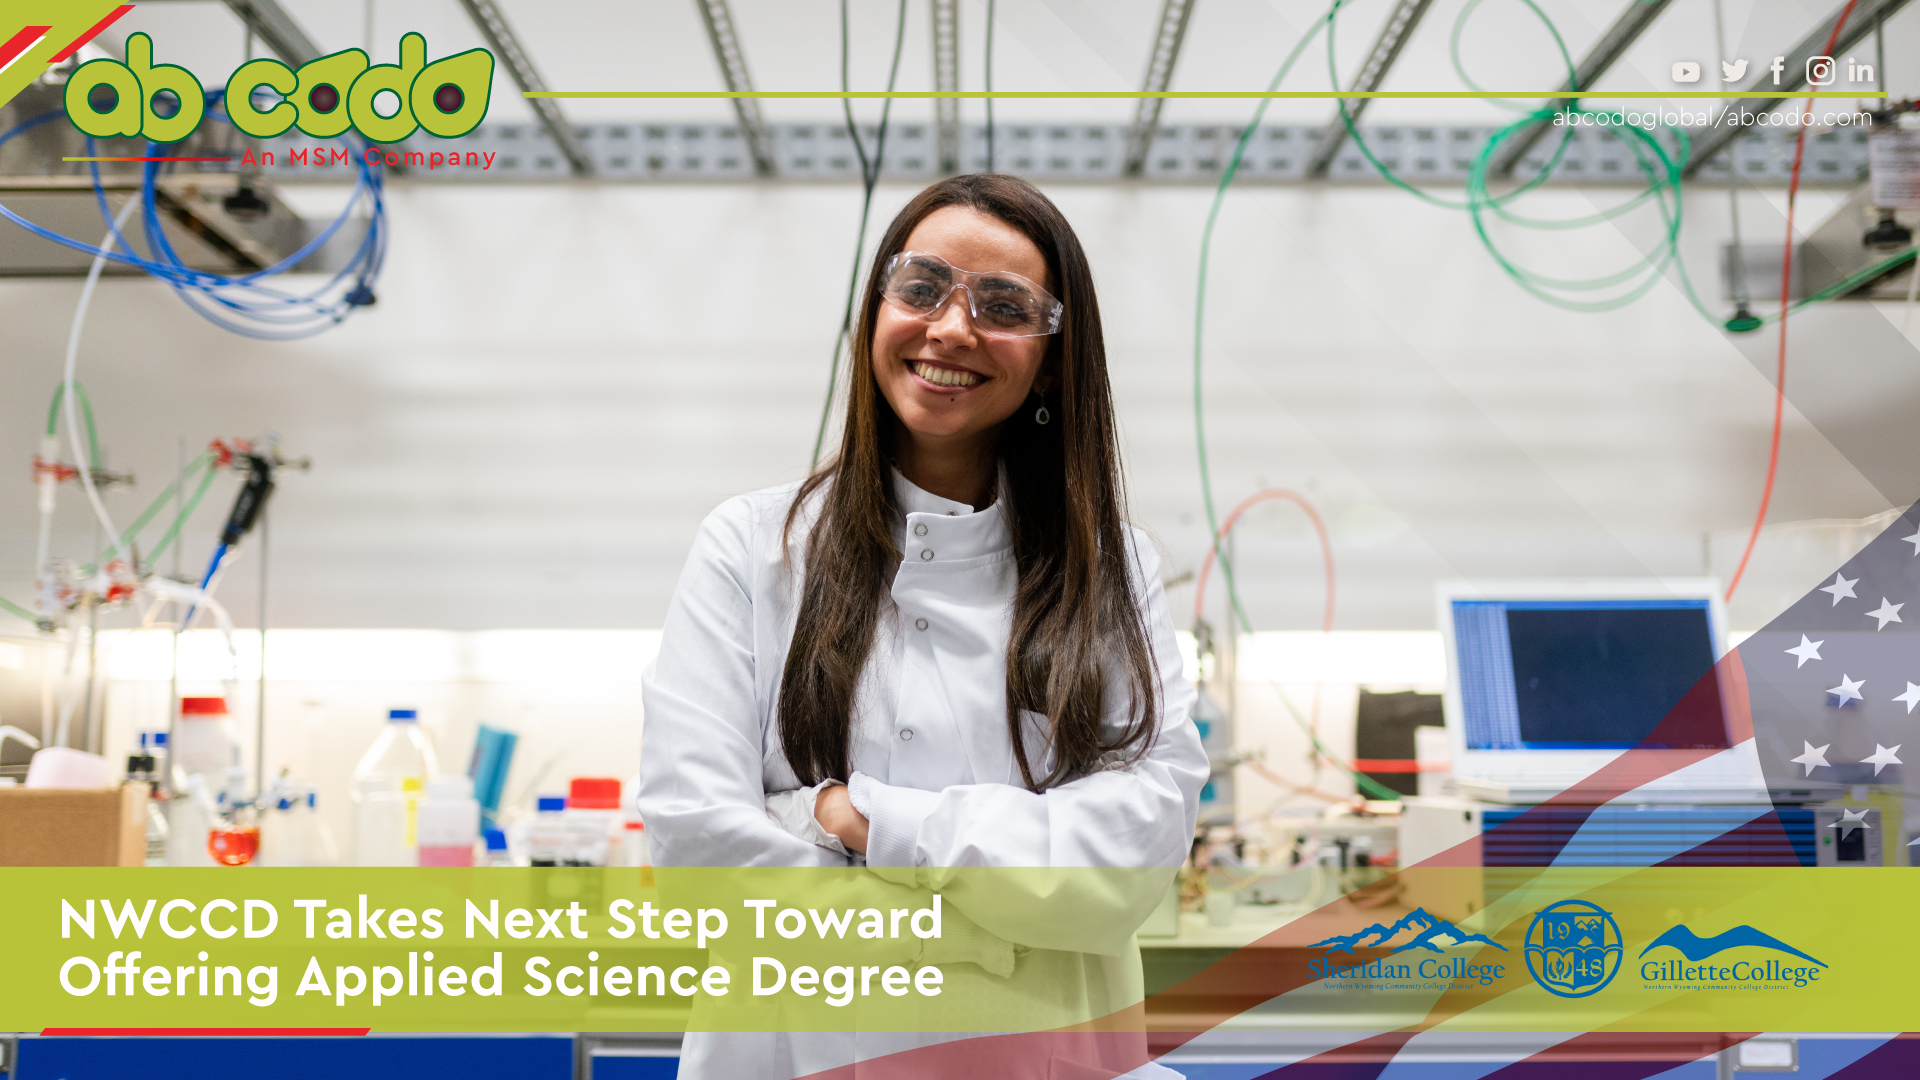 NWCCD Towards Offering Applied Science Degree